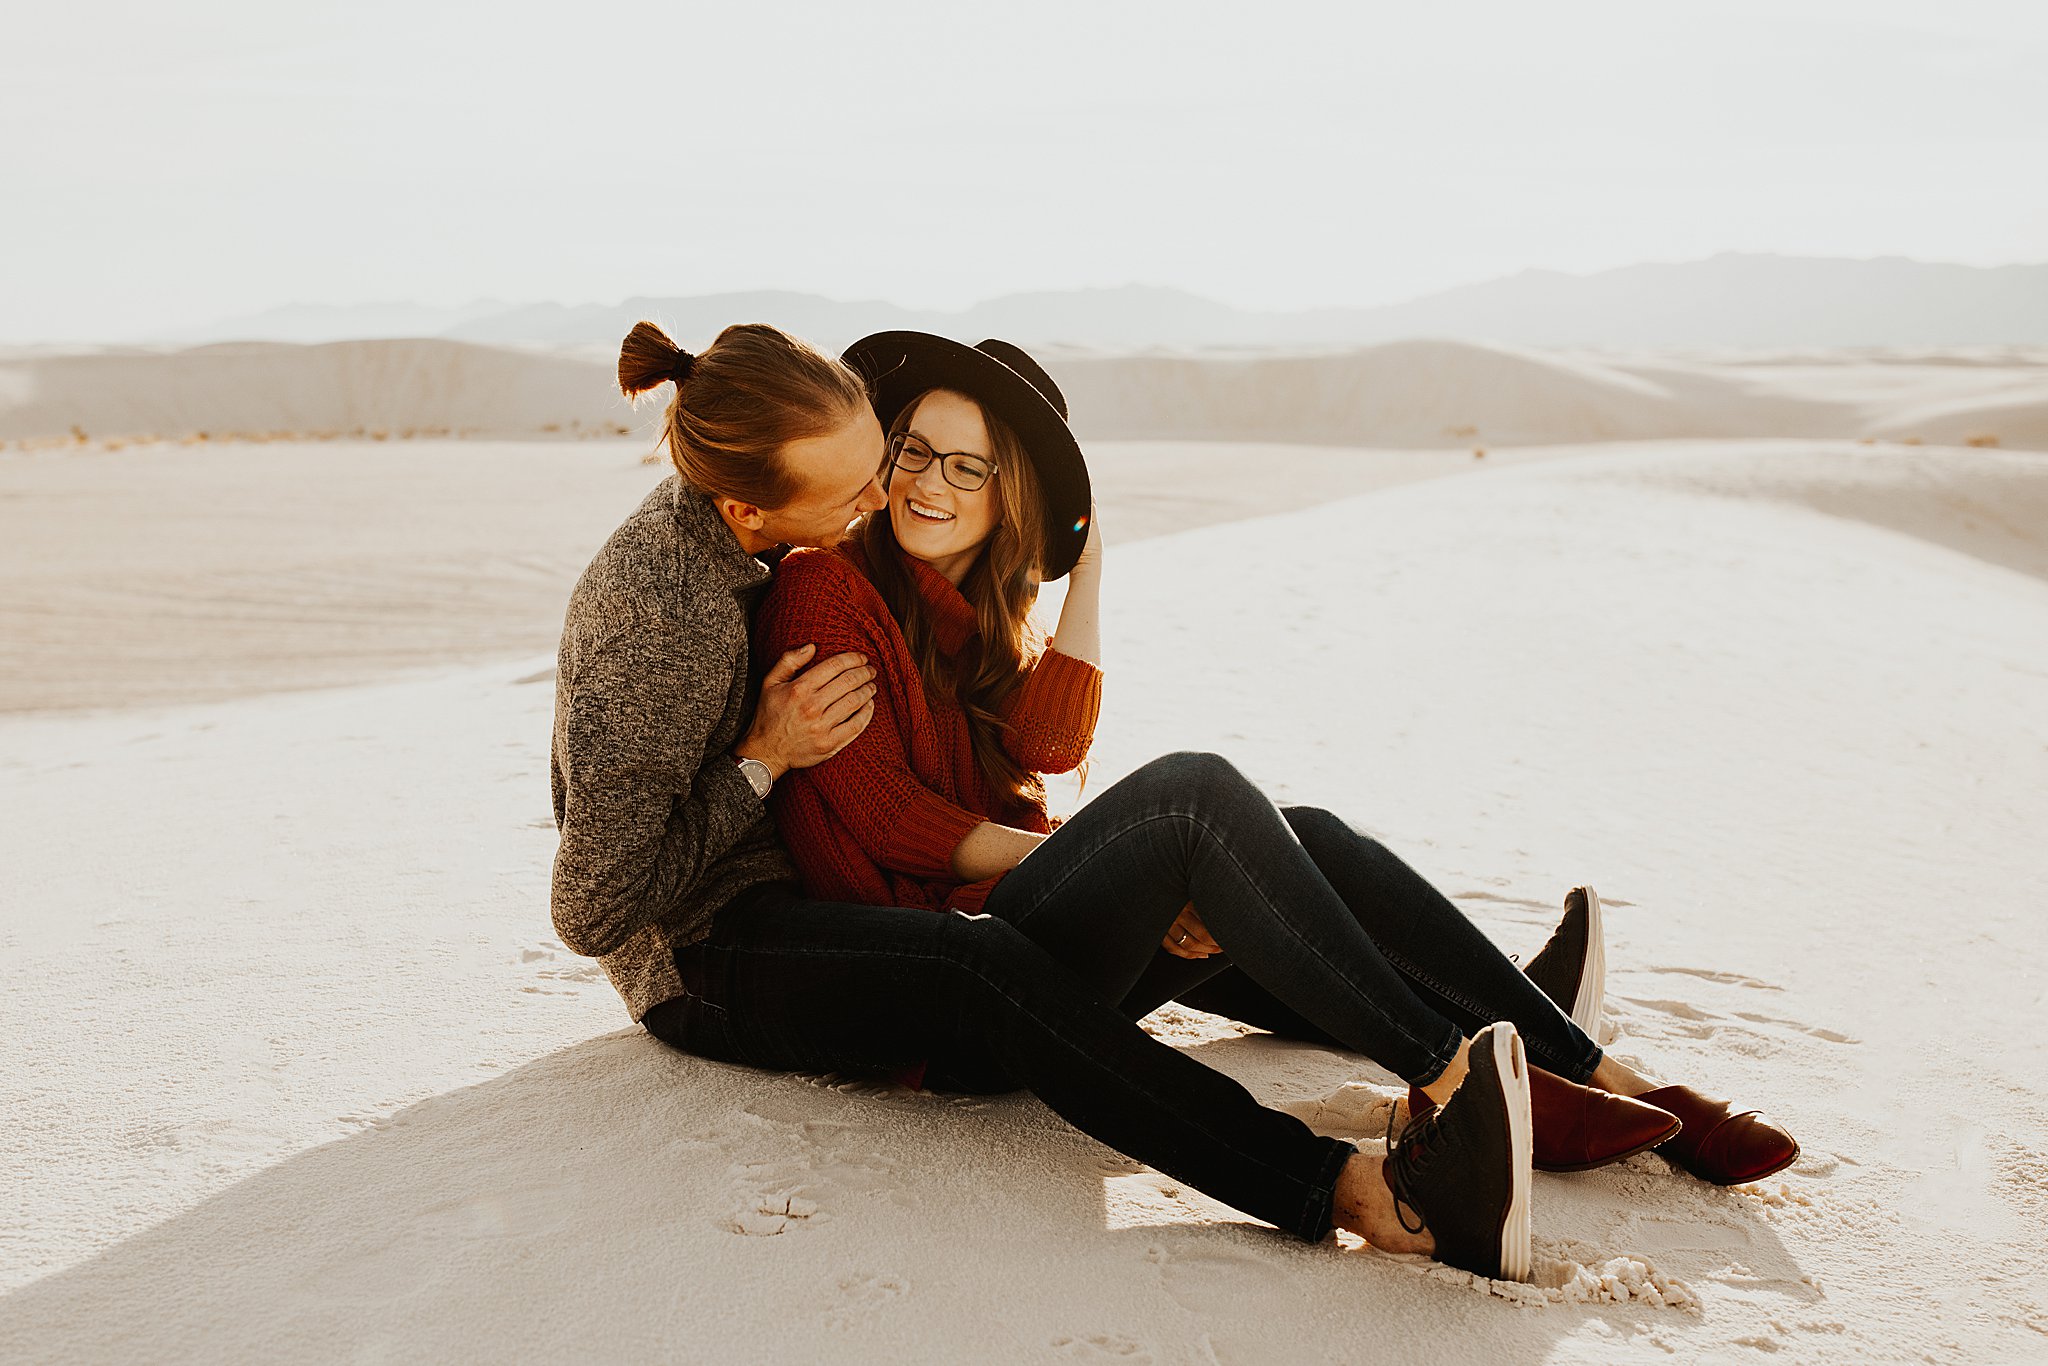 Gorgeous engagement photos at the White Sands National Monument in New Mexico.